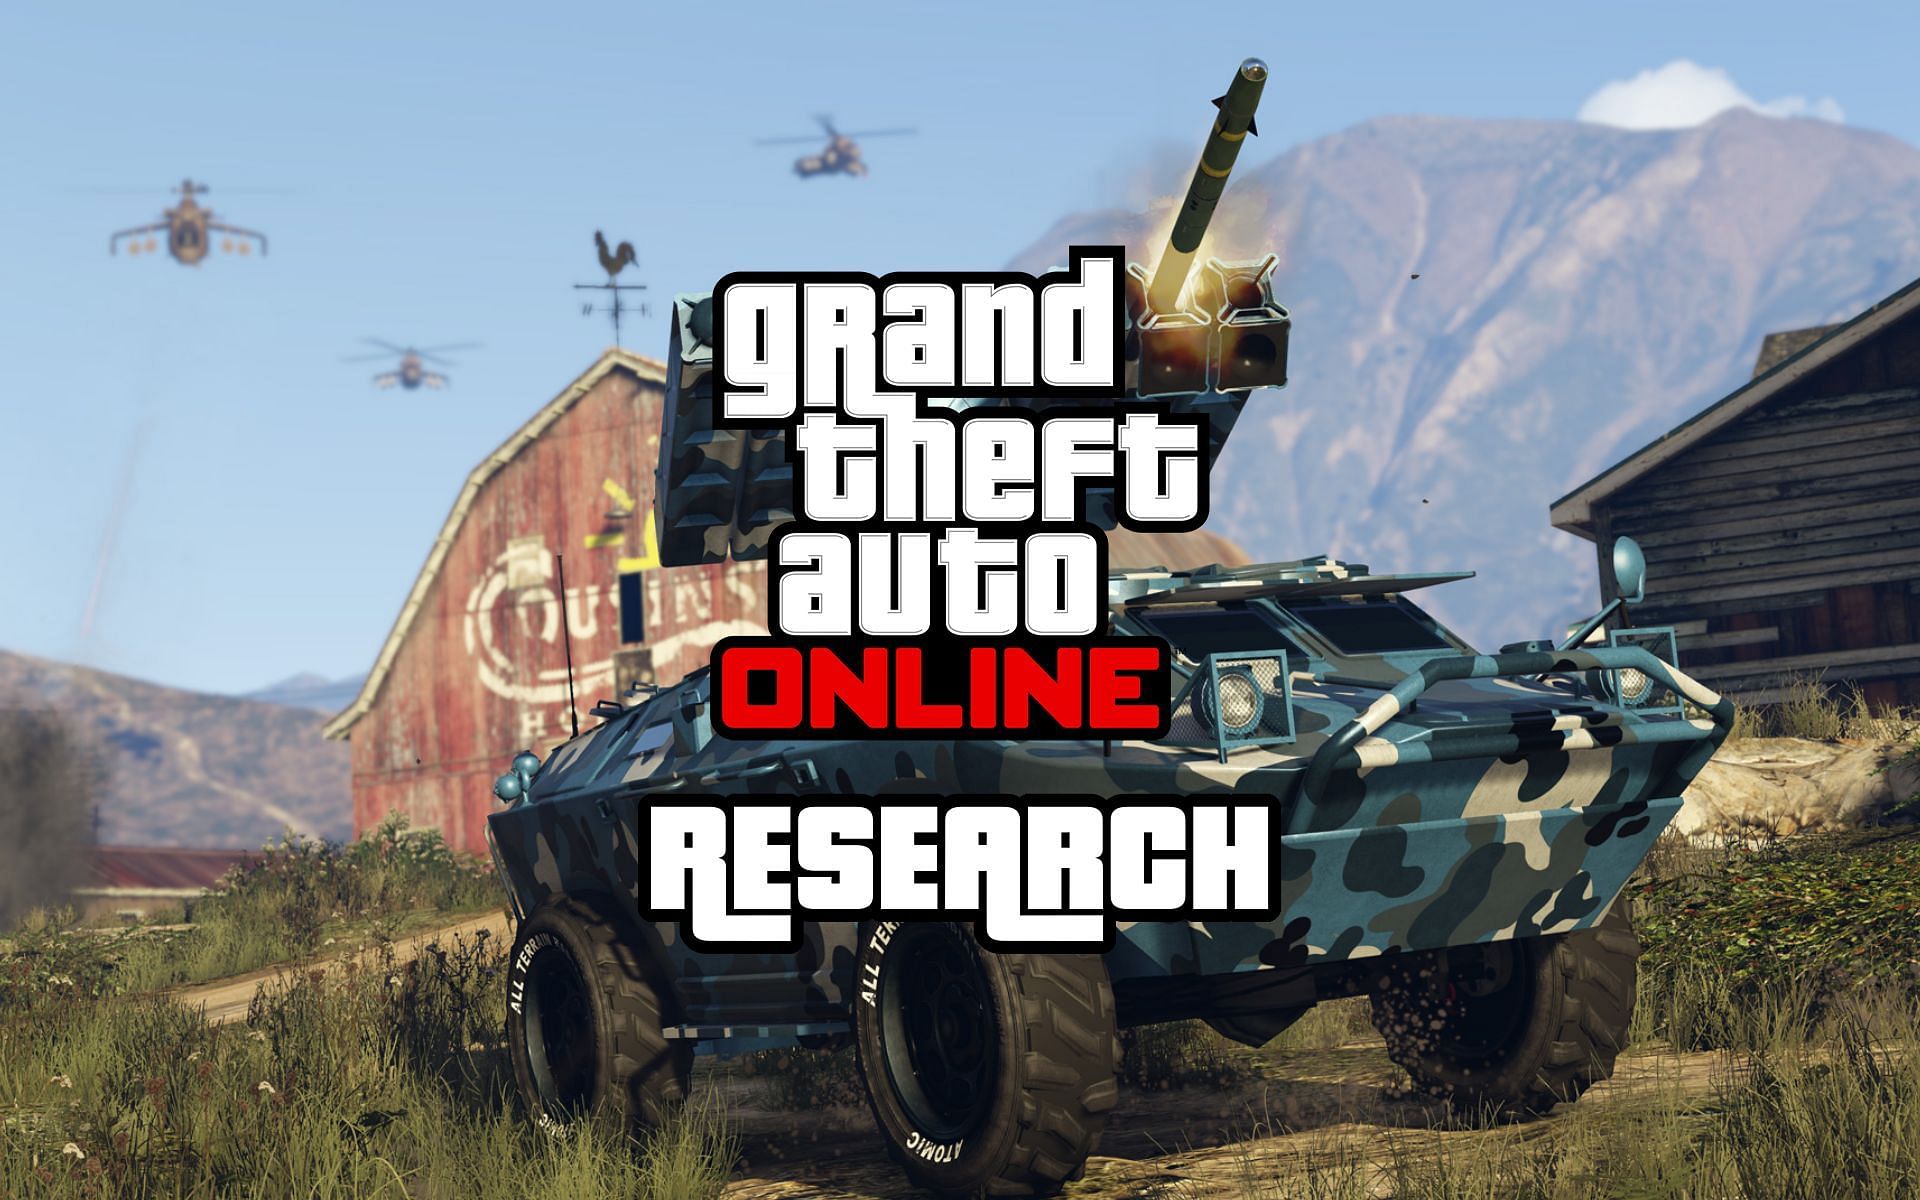 GTA Online players can obtain some useful items through this feature (Image via Rockstar Games)